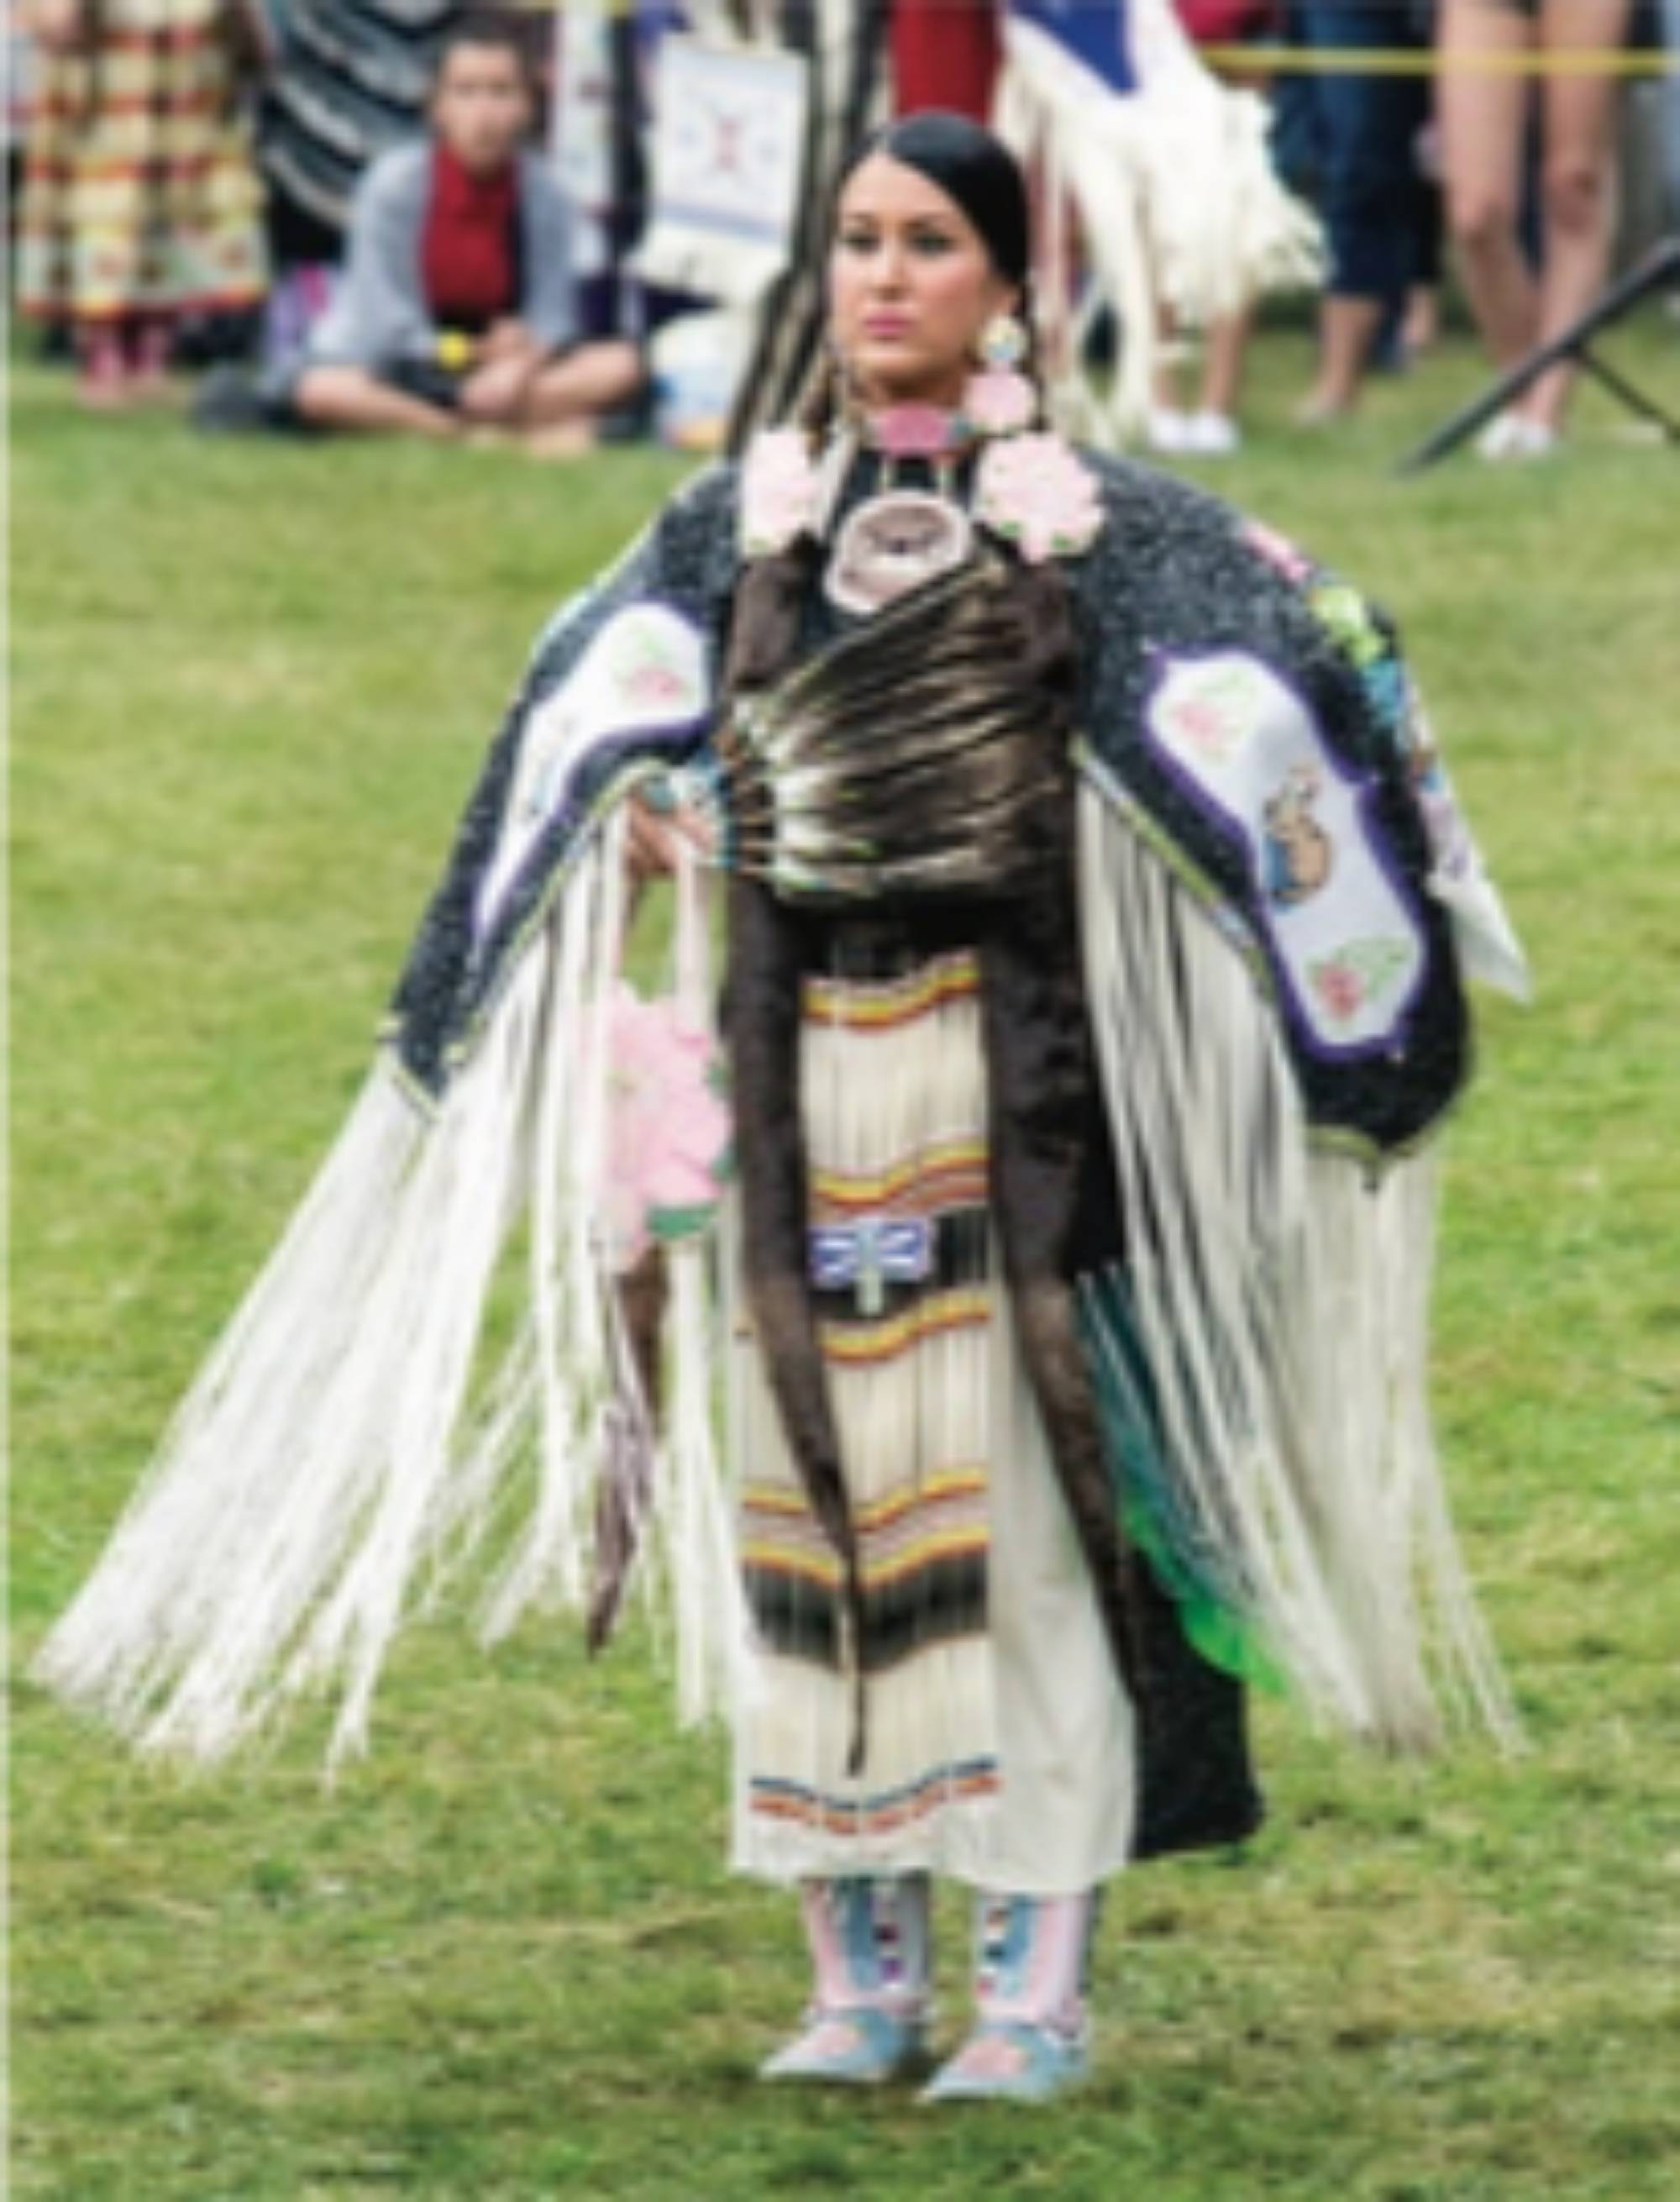 A woman wearing a traditional native outfit at a Pow Wow